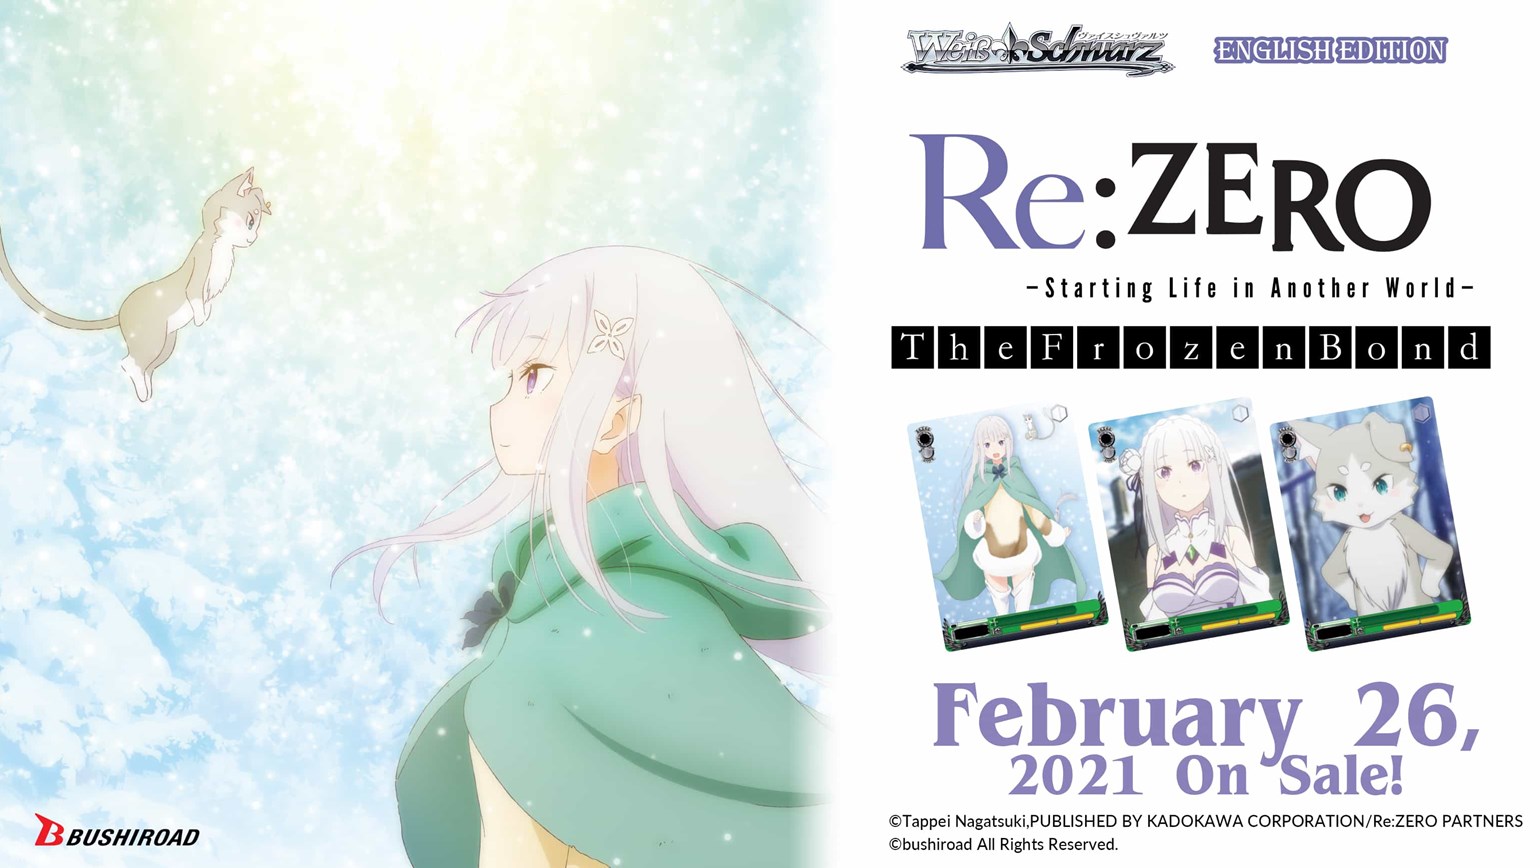 Weiss Schwarz: Re:ZERO -Starting Life in Another World- The Frozen Bond On Sale February 26th!